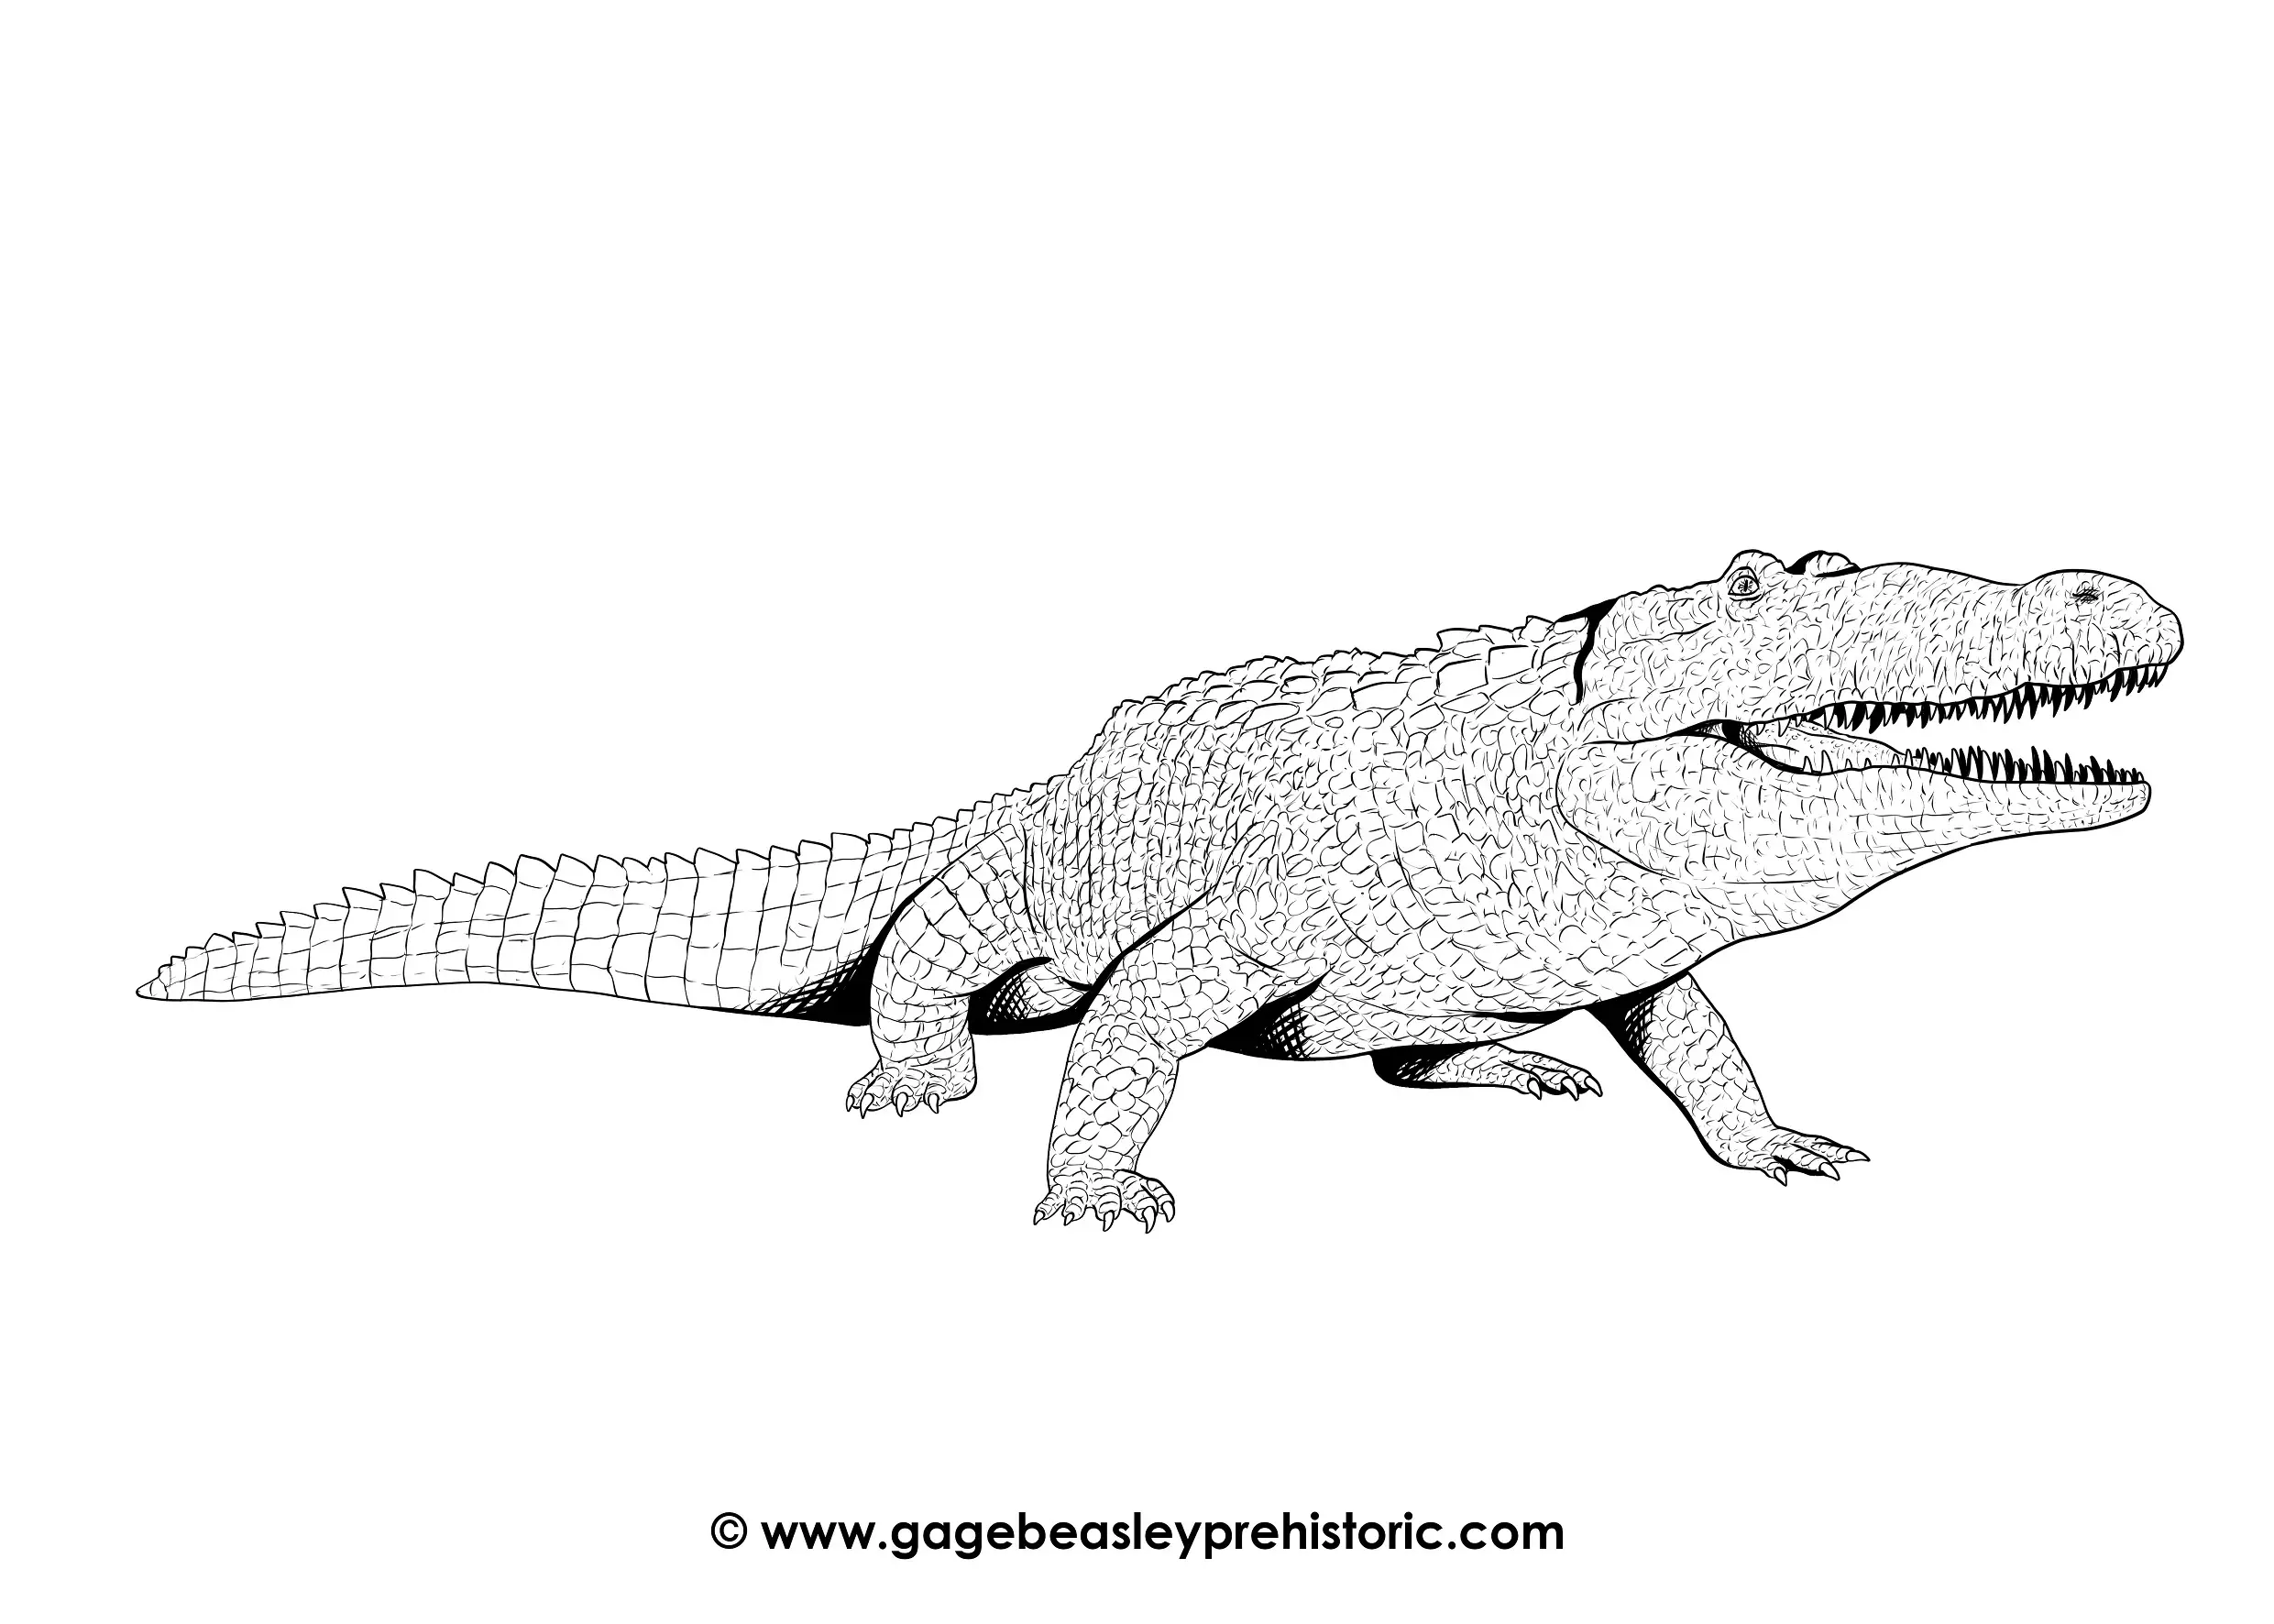 An Ultimate Guide to Deinosuchus: The Terrible Crocodile